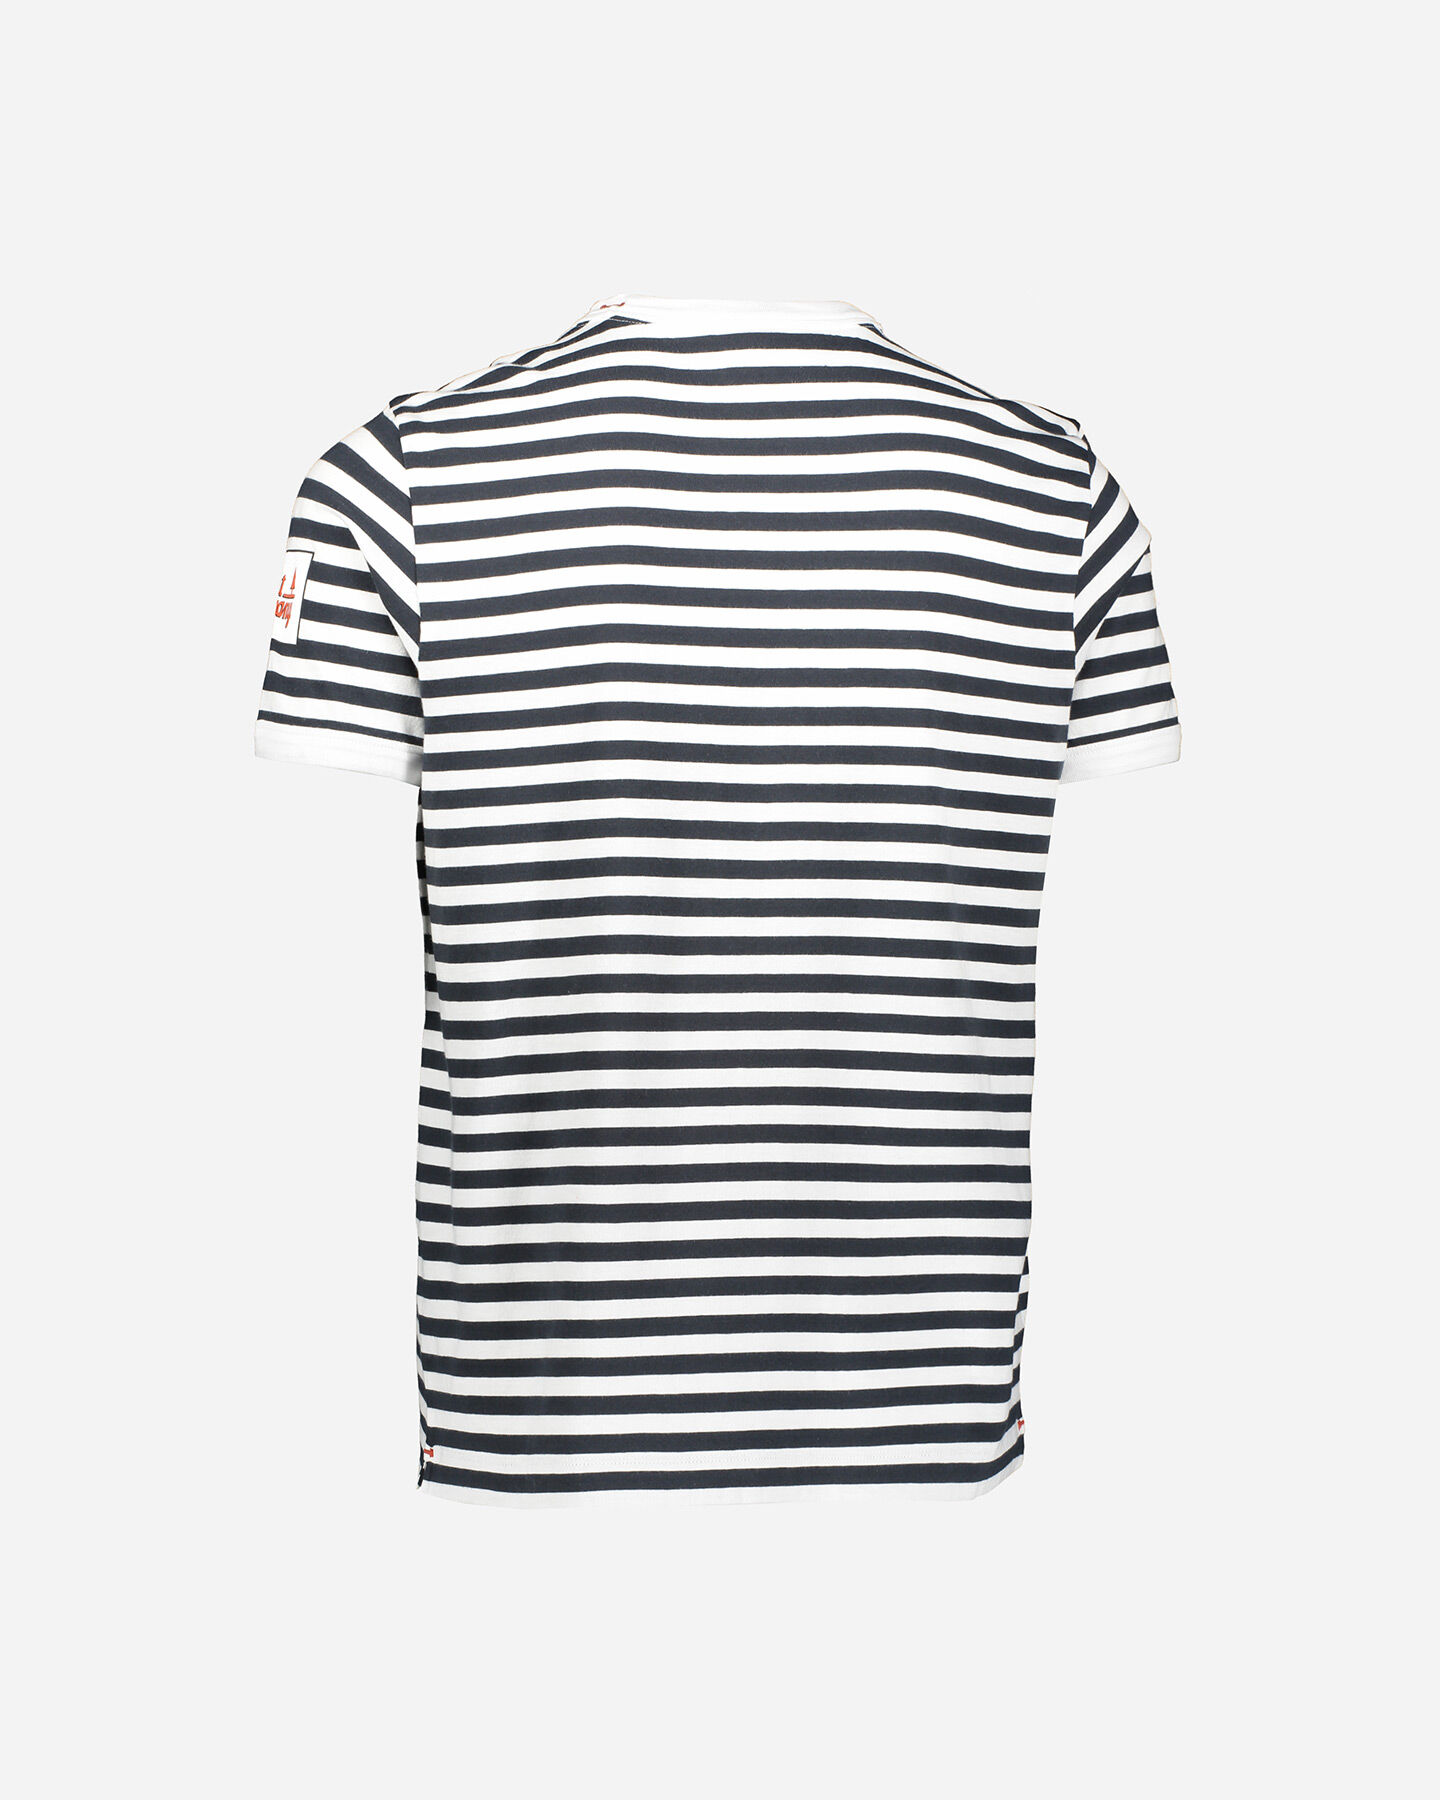  T-Shirt BEST COMPANY OVER STRIPES M S4077451|0800|S scatto 1